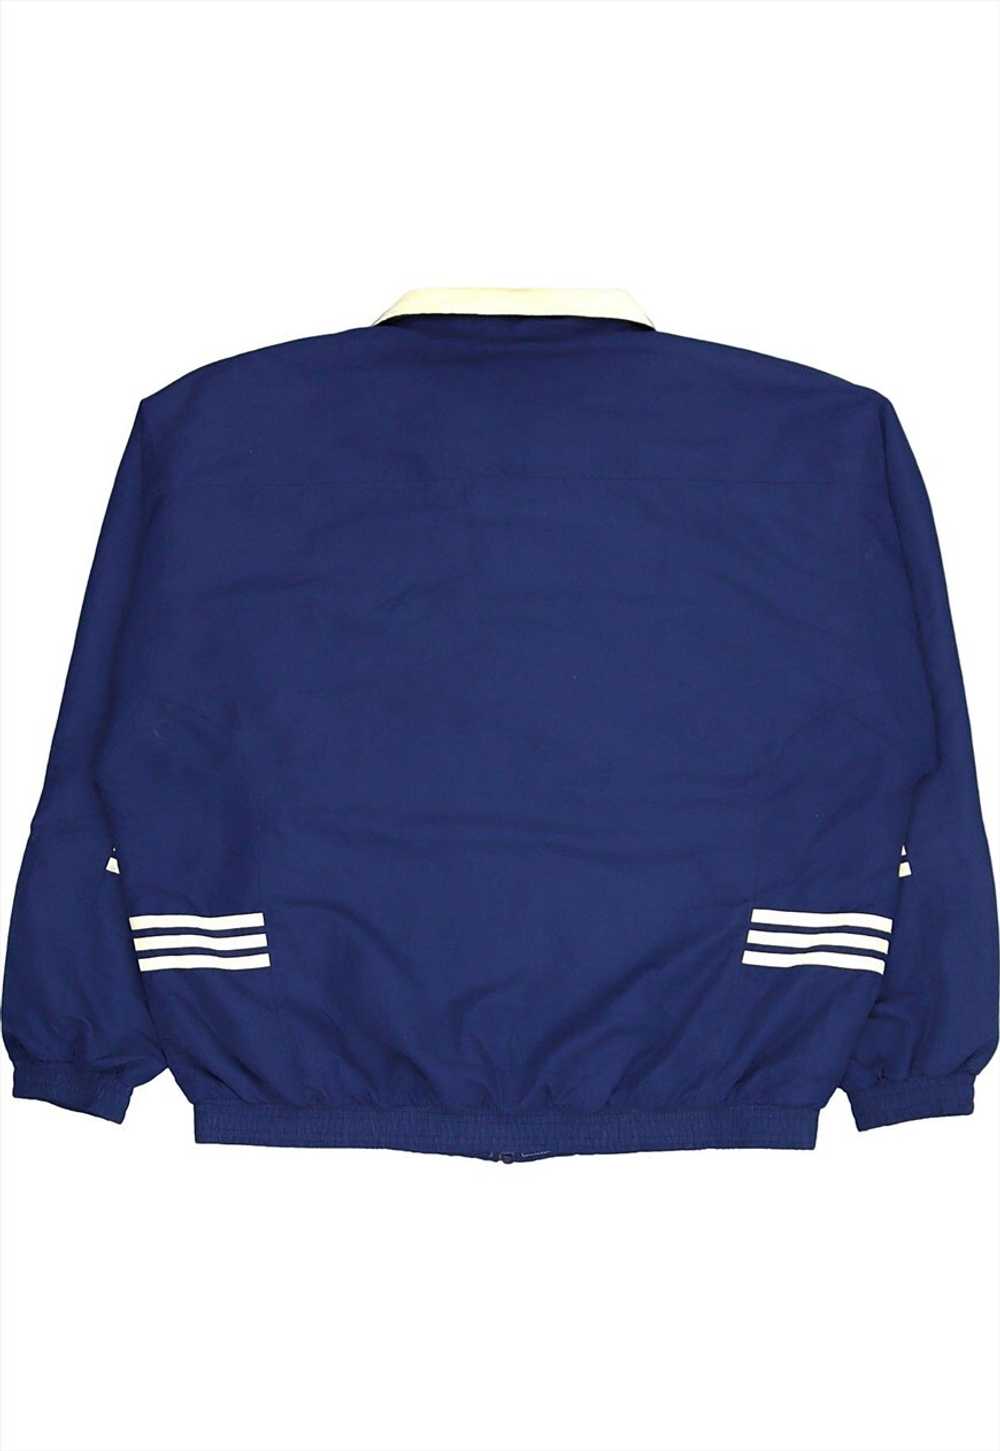 Vintage 90's Adidas Bomber Jacket Spellout Zip Up - image 2